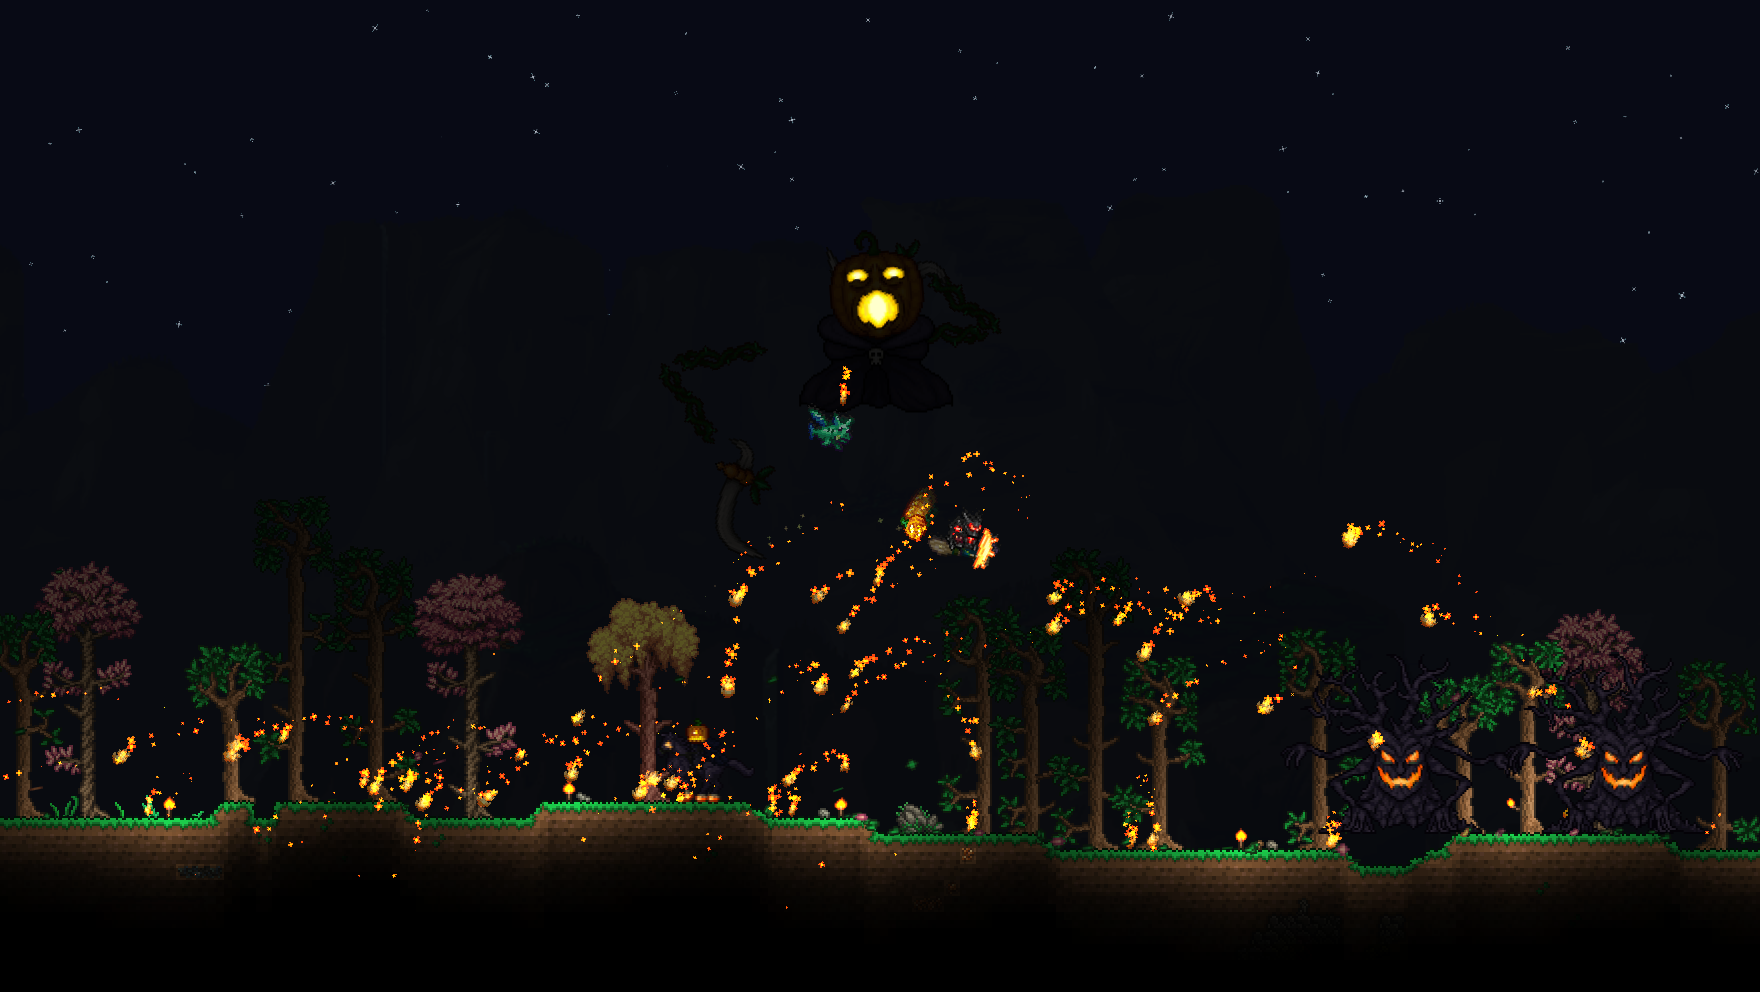 Terraria Update 1.29 Released for Labor of Love Patch 1.4.4 This